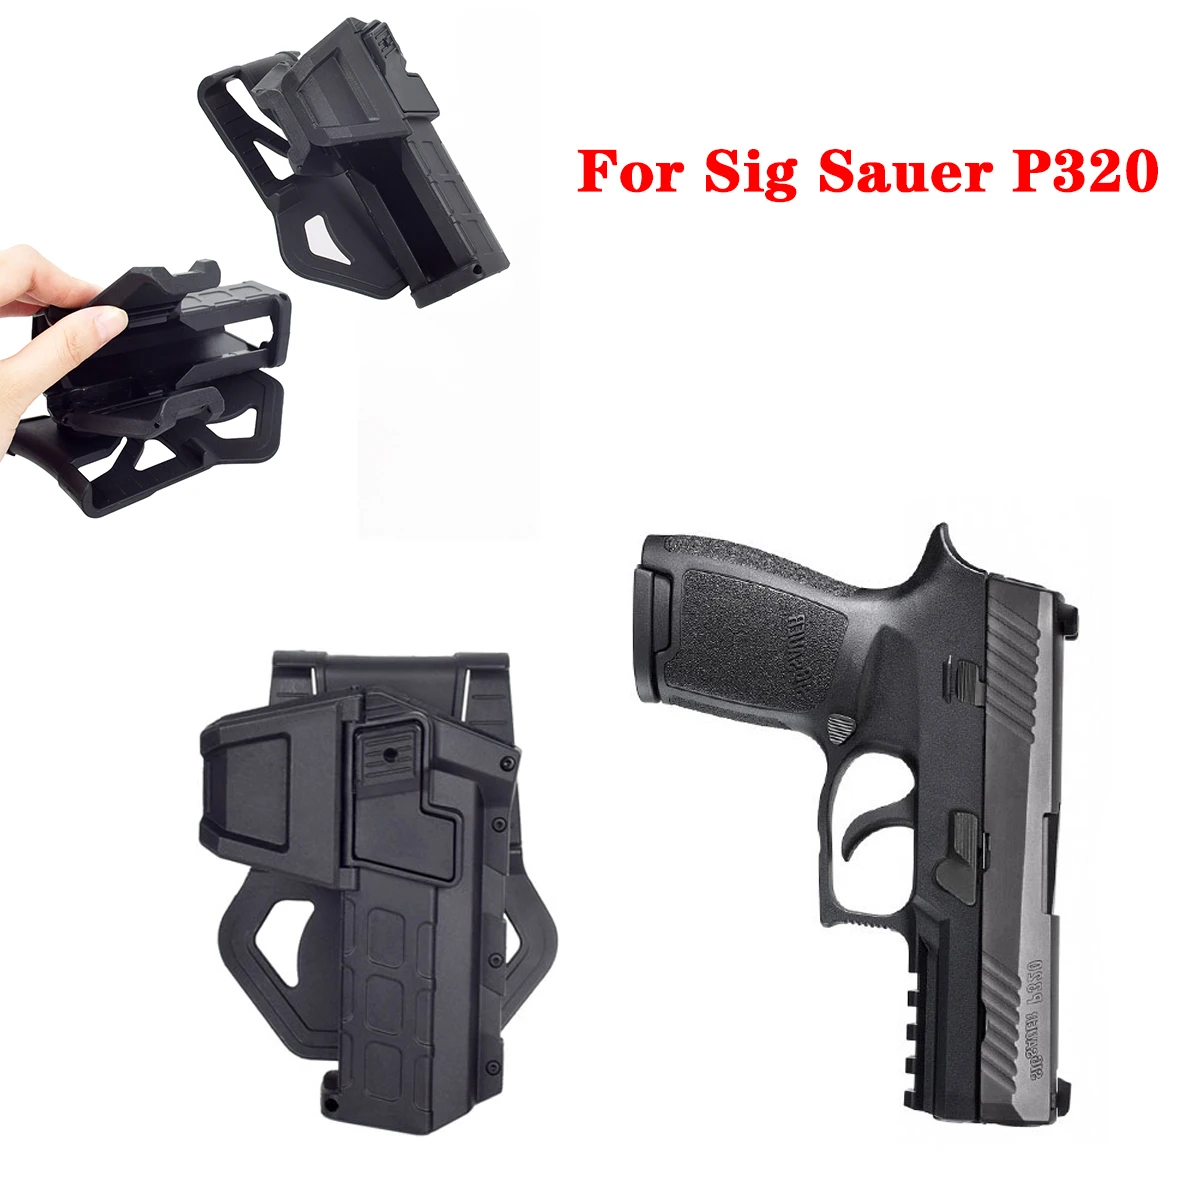 

Tactical Gun Holsters Rubber Fit SIG SSUER P320 Pistol With Weapon Light Airsoft Belt Waist Right Hand Hunting Shooting Case